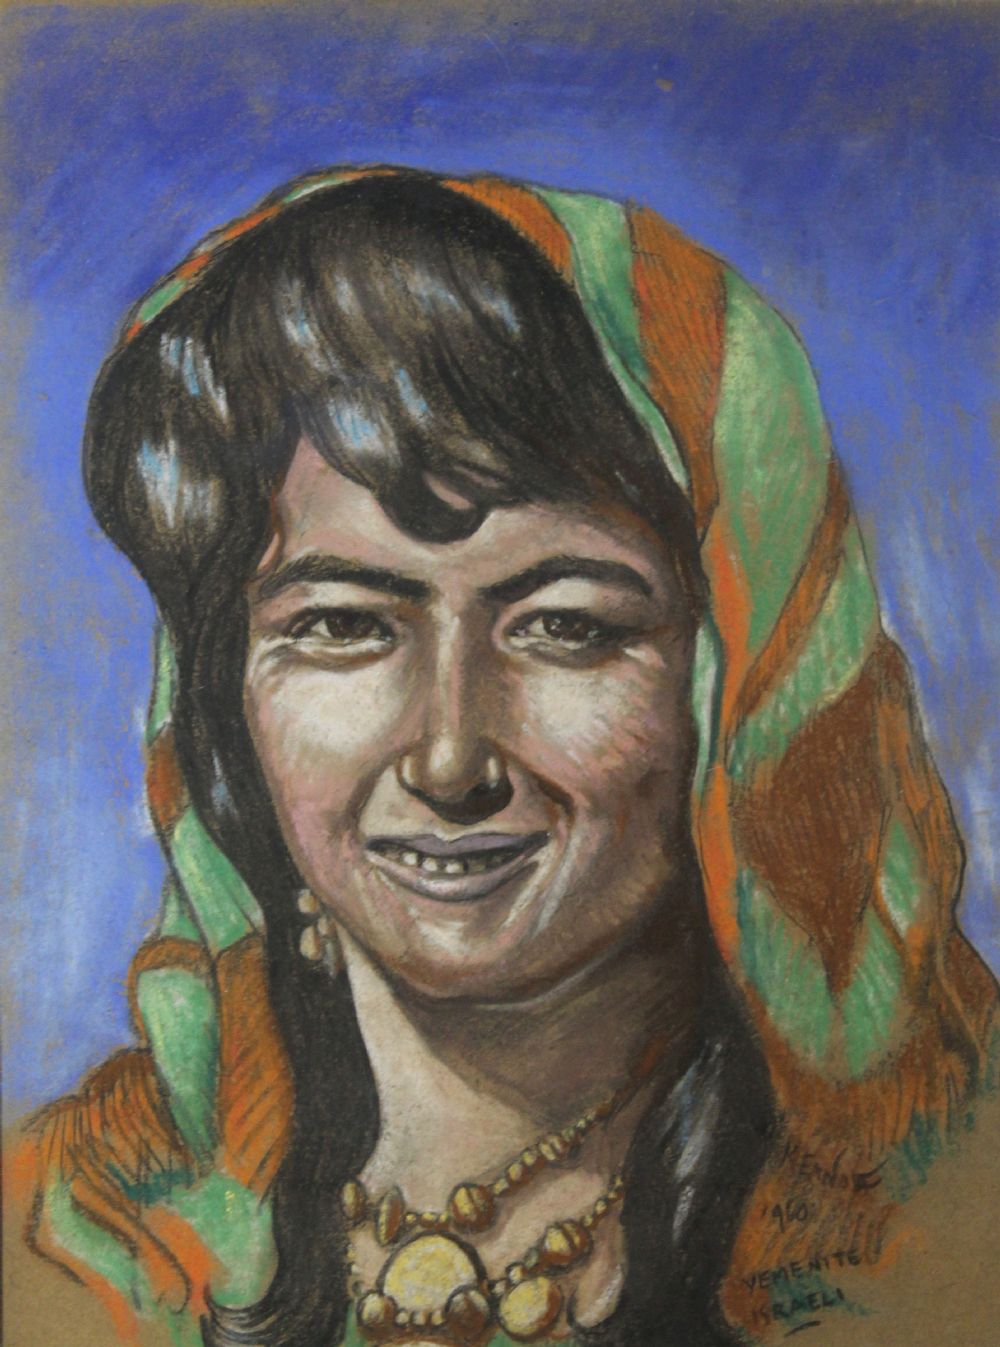 YEMENITE ISRAELI by Harry Kernoff sold for €900 at deVeres Auctions